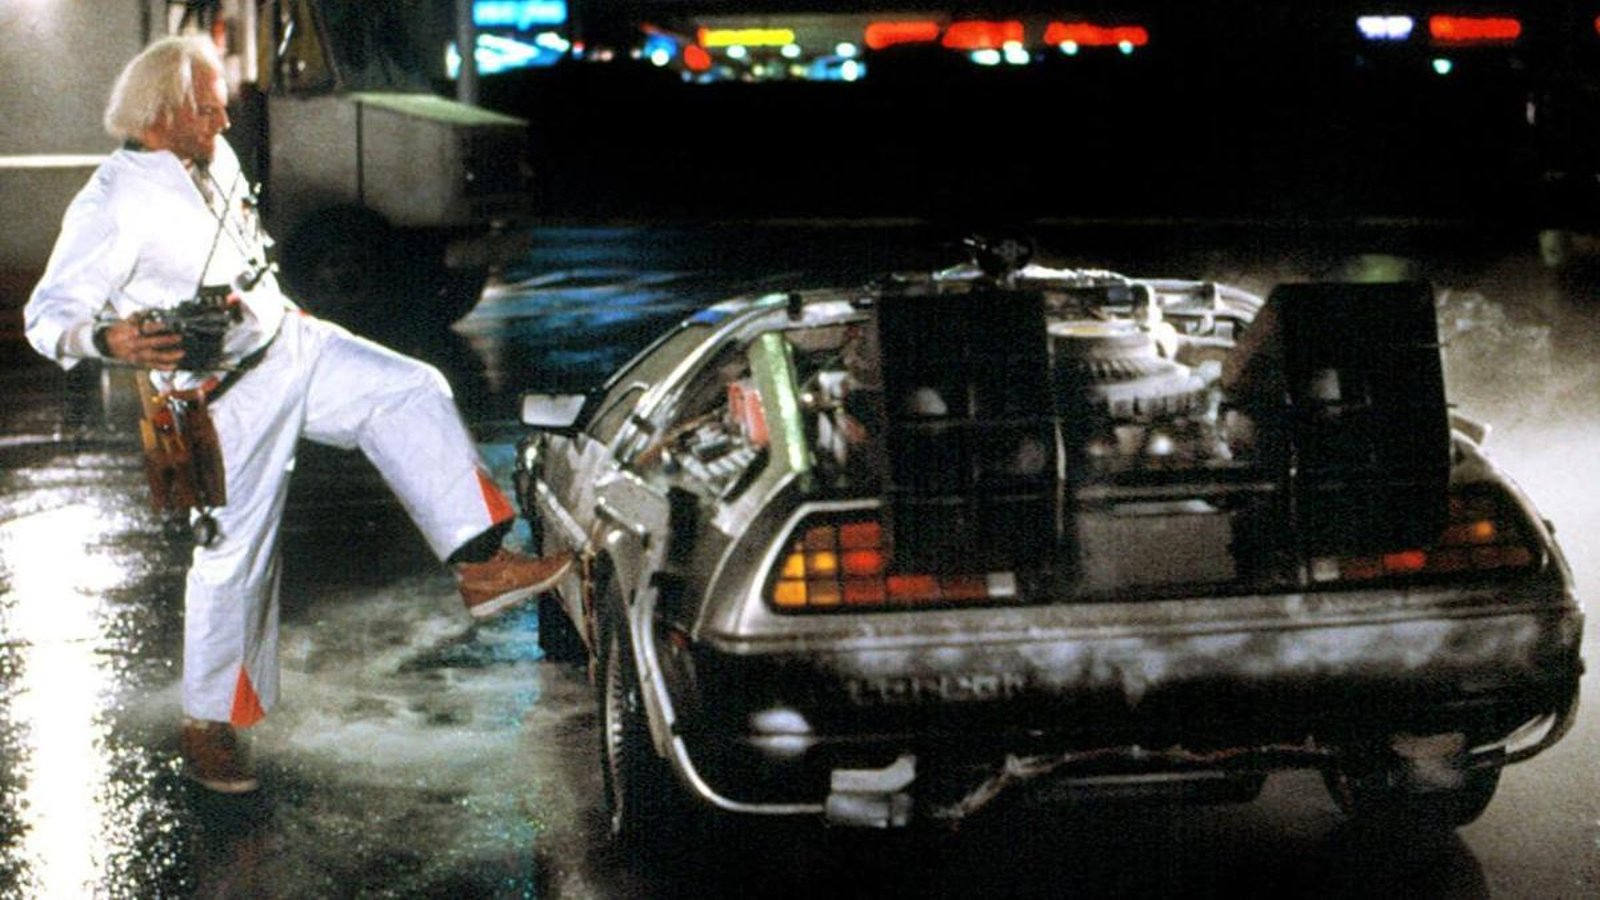 Oilers played ''Back to the future'' type game tonight. 